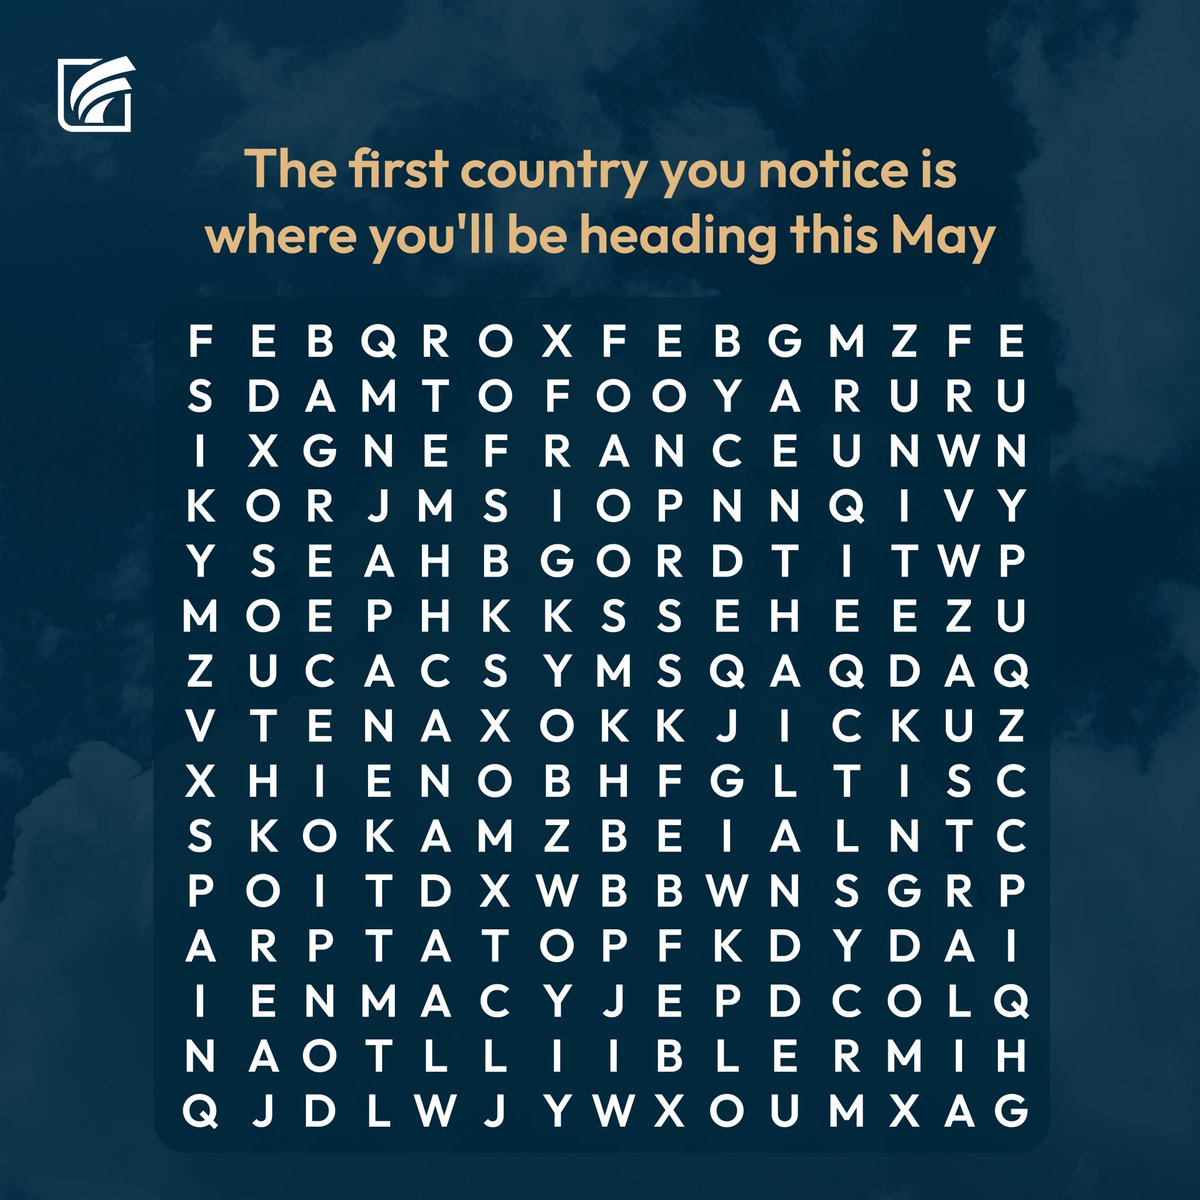 Need help picking your May holiday destination? Let us assist you. Simply spot the first country you see, and that's where you're headed! 🏖️  Share your destination in the comments below #FEB #BusinessBanking #Banking #FinTech #Blockchain #DigitalAssets #BusinessFinance #Holiday